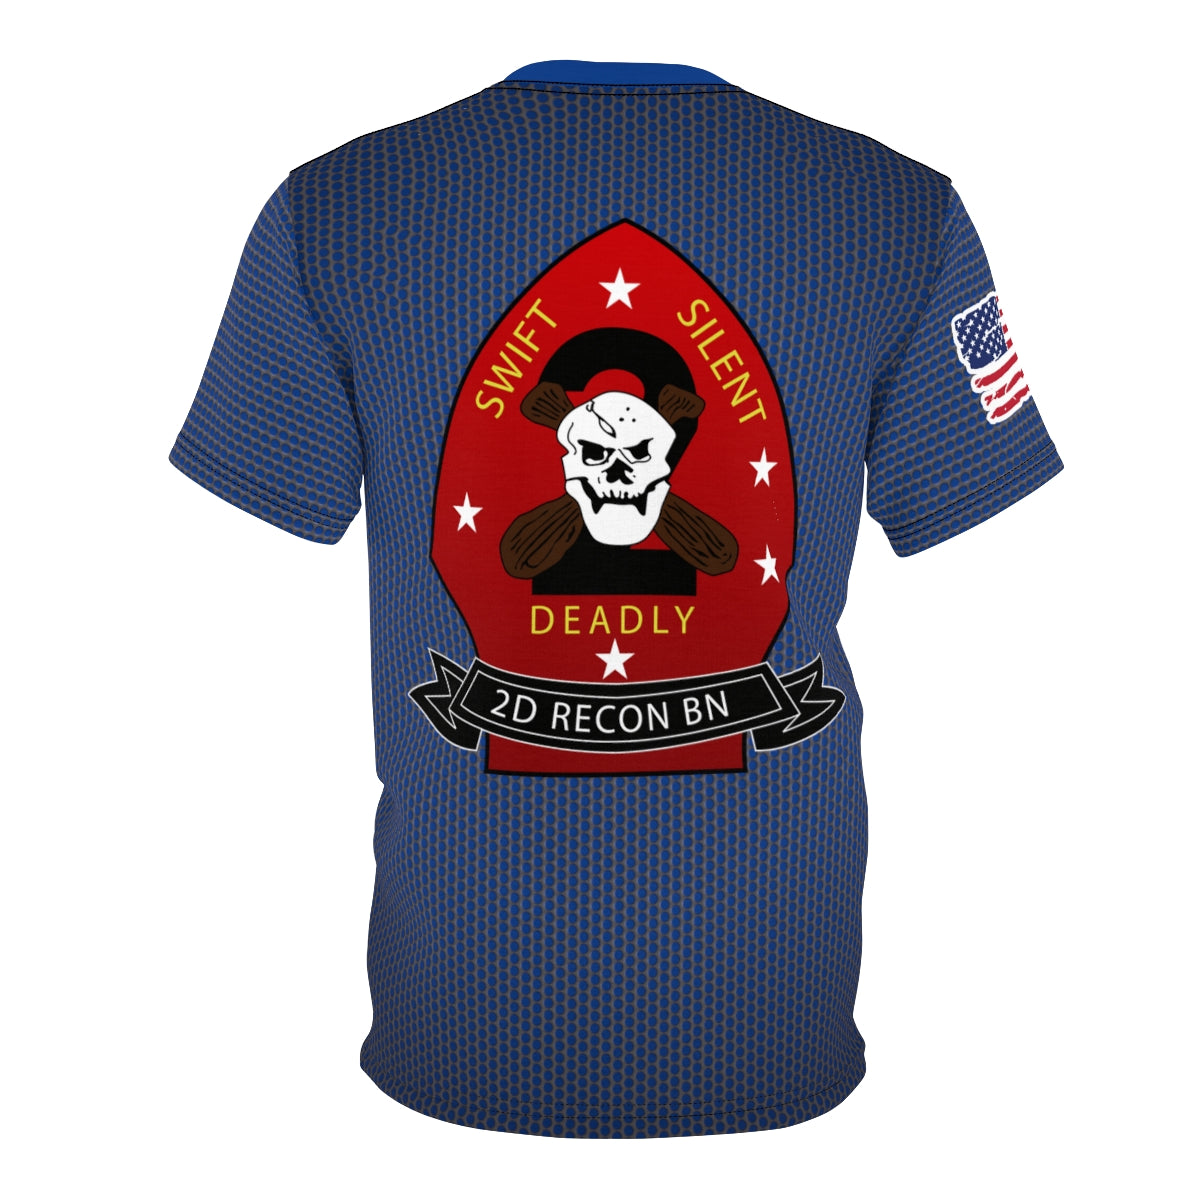 2nd Recon Btn